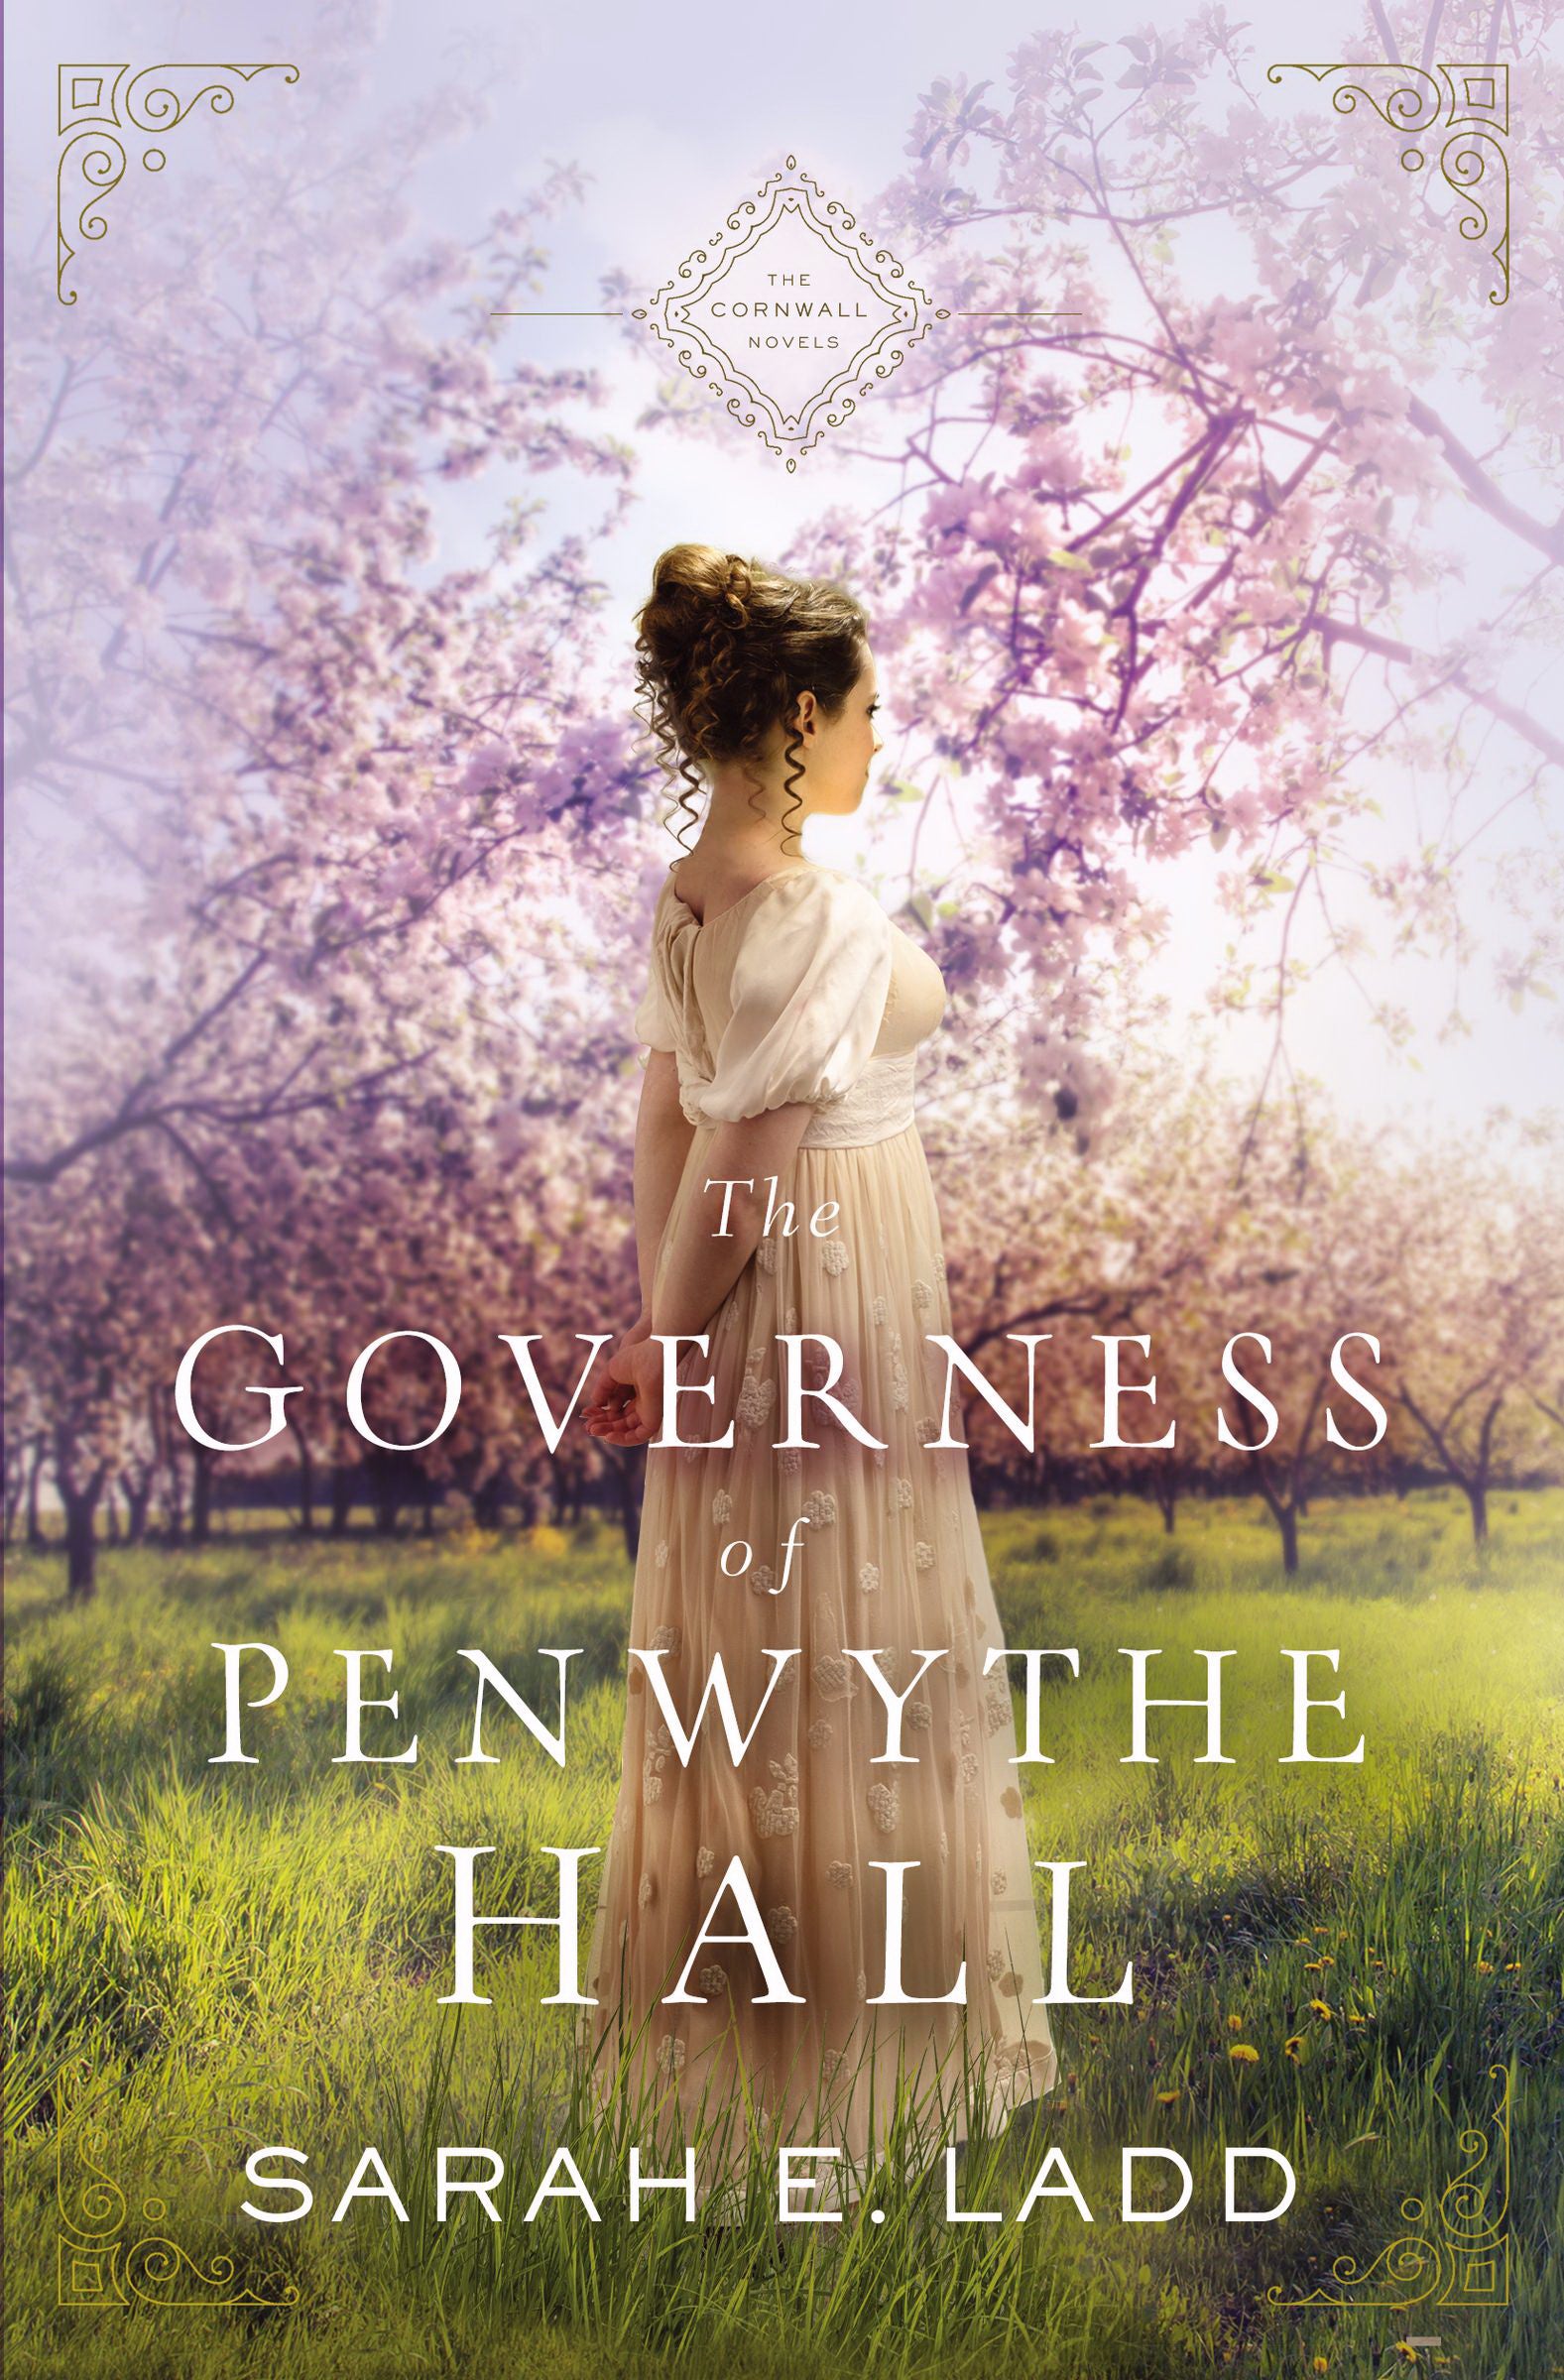 Image of The Governess of Penwythe Hall other